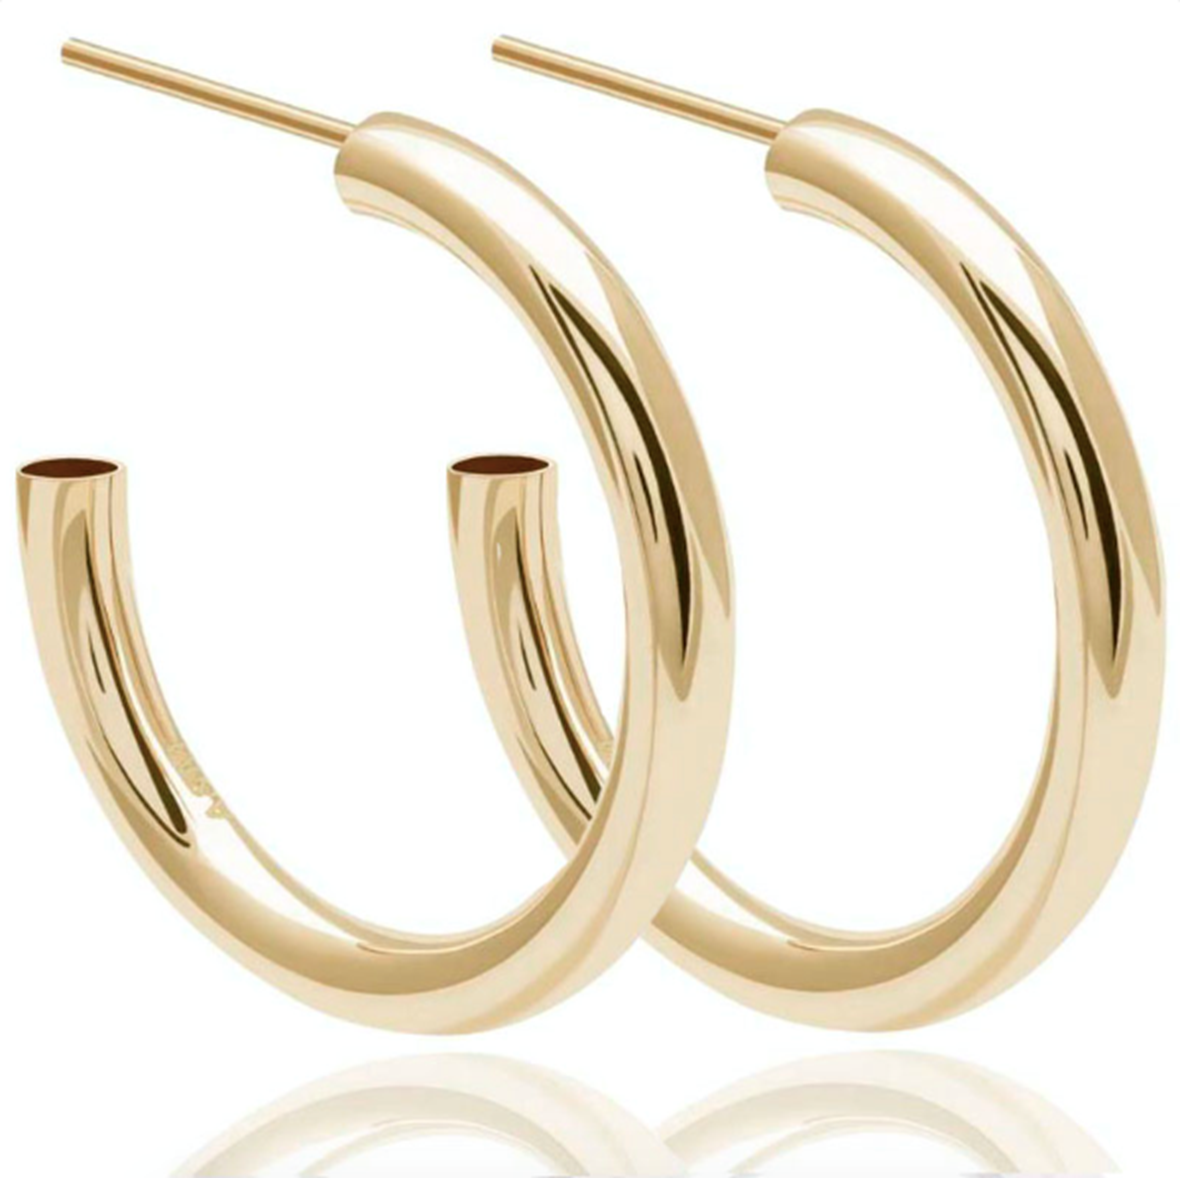 Basic large hoops in gold - 60 - St Christopher's Place